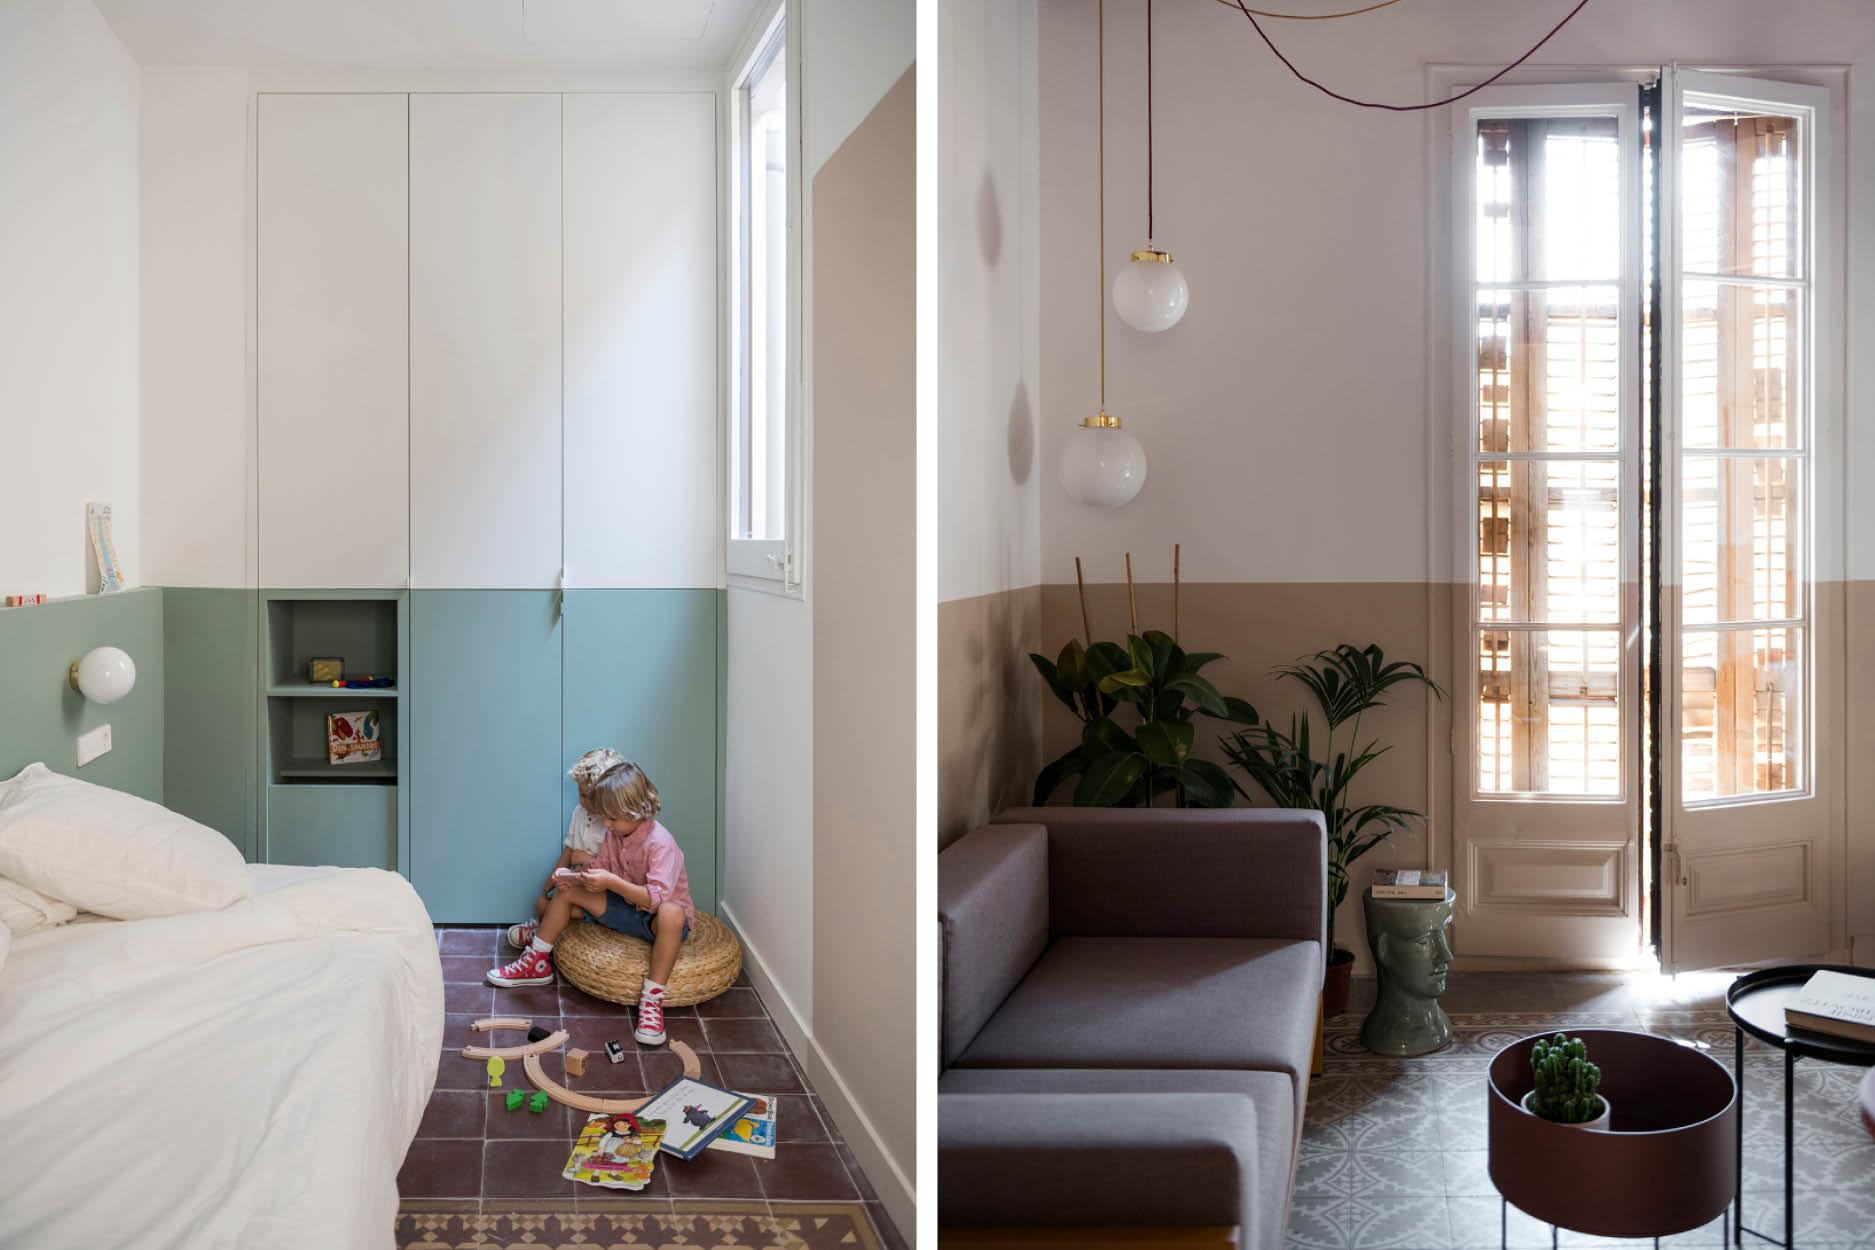 This Apartment is Reborn from Ruins with Contrasting Colour Blocking